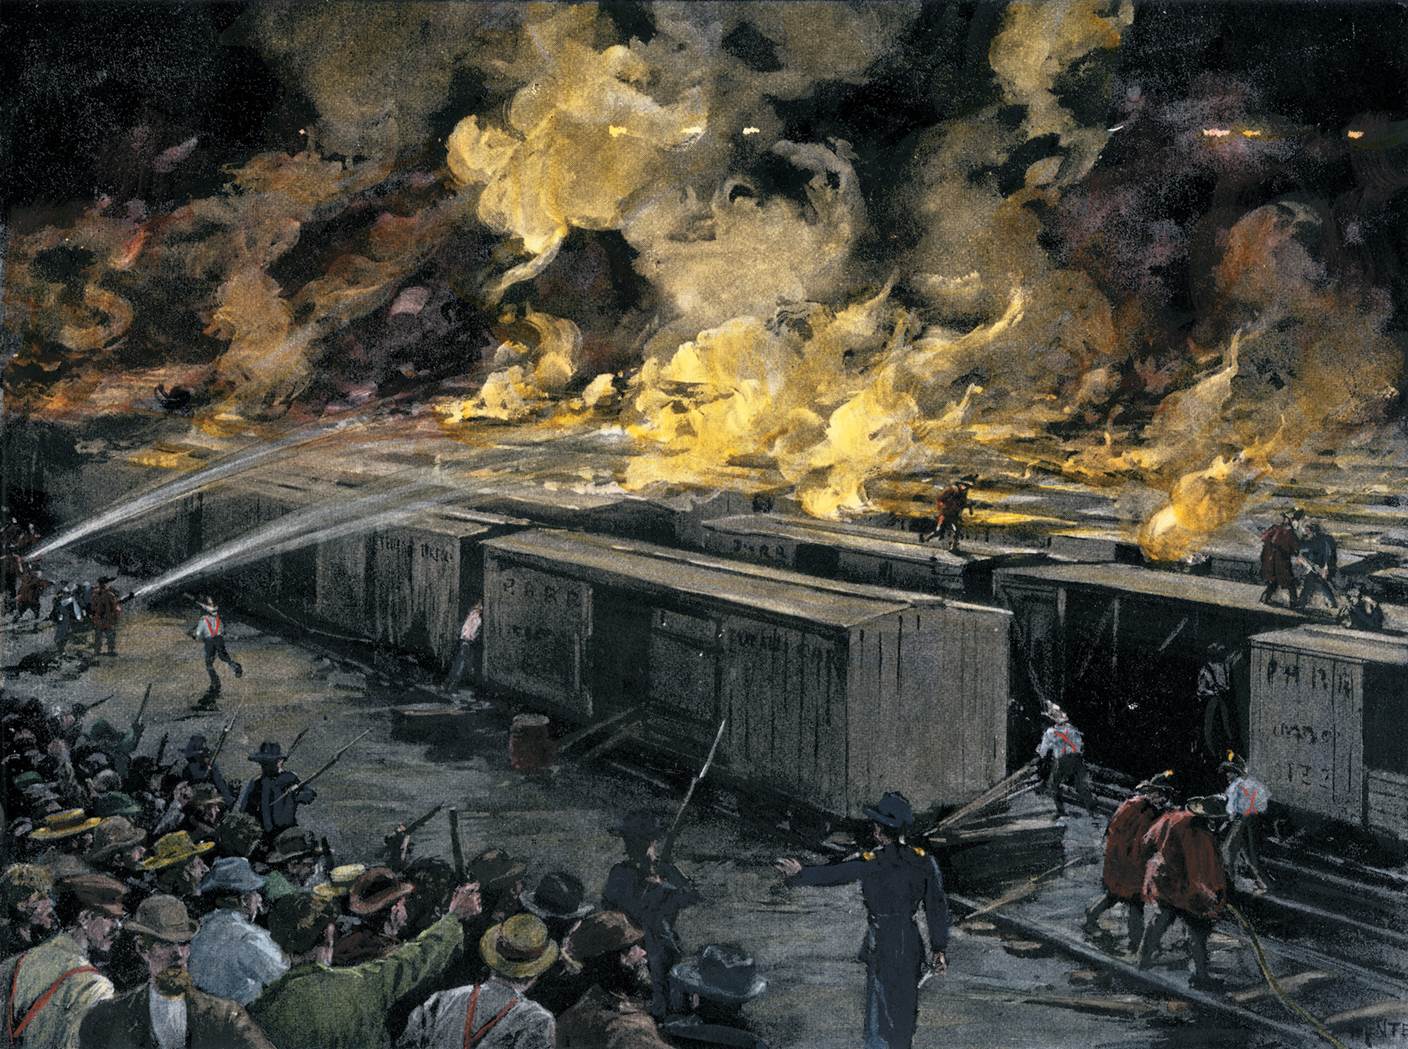 During the Pullman strike in Chicago, workers protesting wage cuts did $340,000 in property damage, 